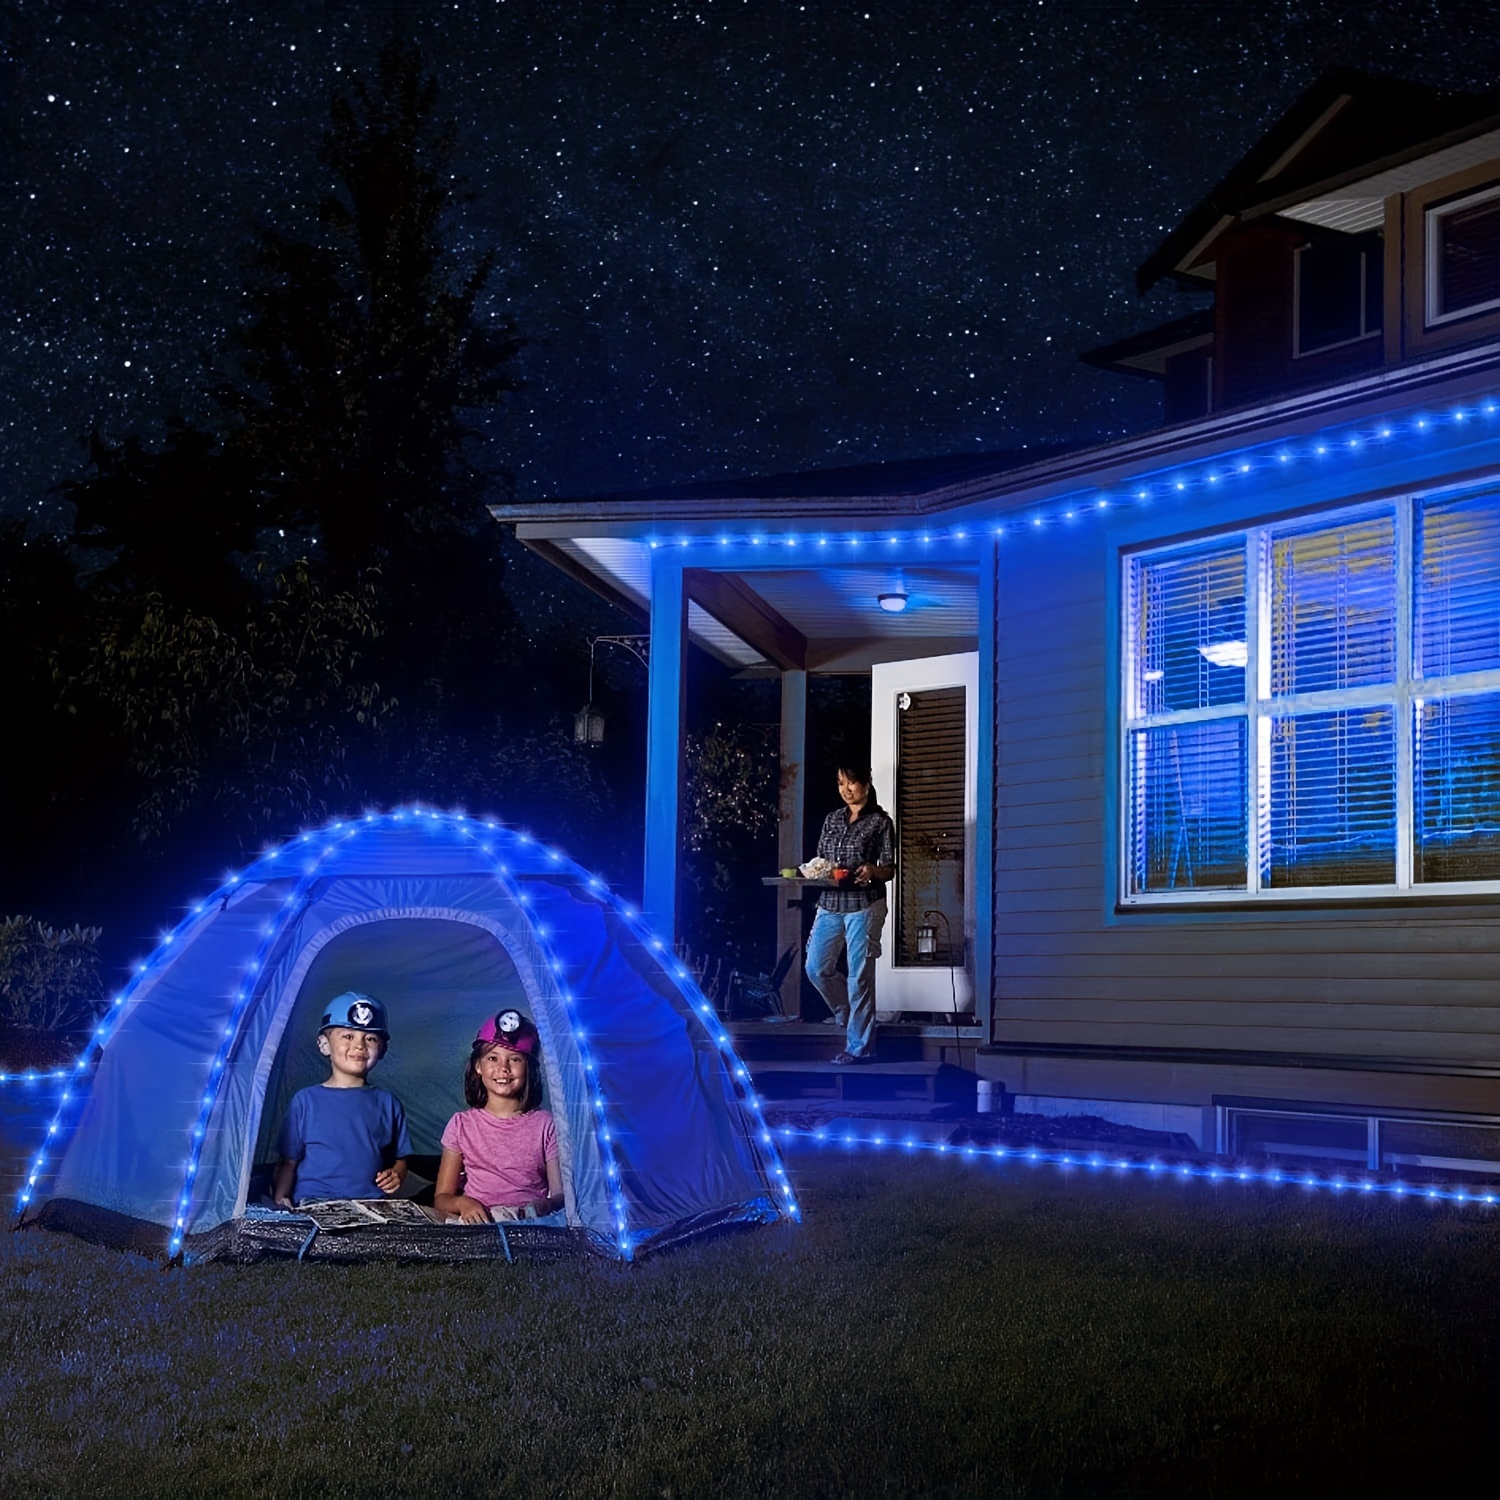  Camping Tent String Lights, 17 Colors 7 Flashing Modes LED  Decorative Rope Lights Battery Operated with Remote Control, Waterproof Camping  Tent Light Outdoor for Night Camping, RV (Tent Not Include) 